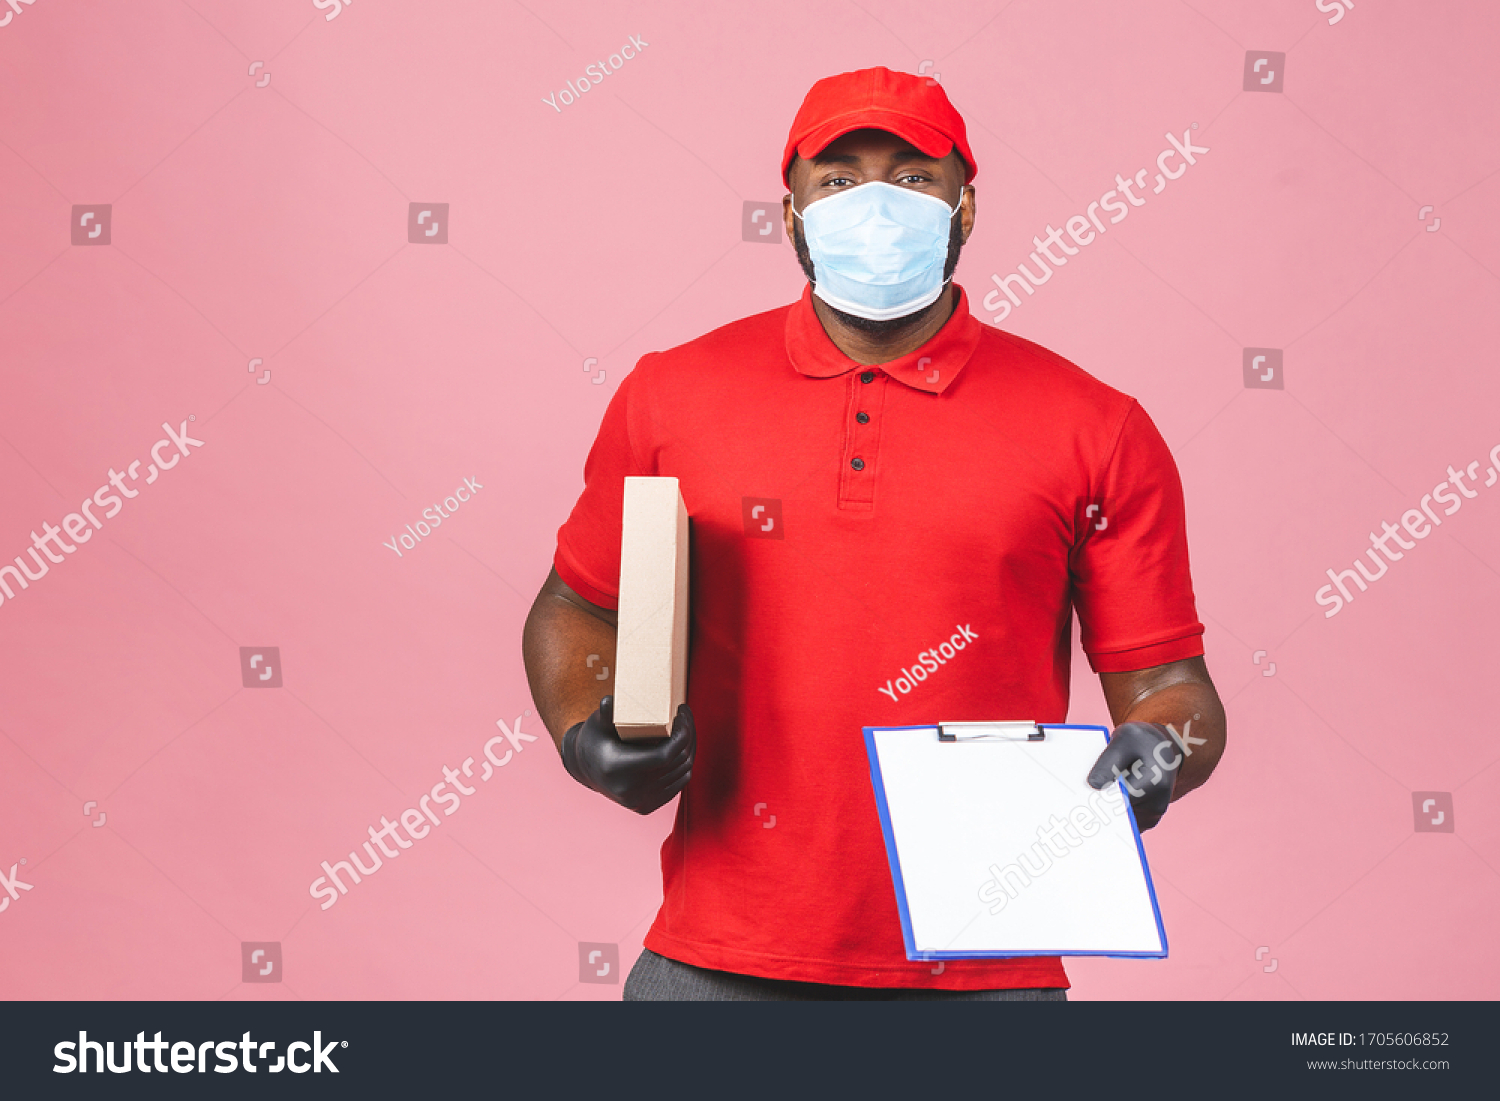 Delivery man employee in red cap blank t-shirt uniform face mask gloves hold empty cardboard box isolated on pink background. Service quarantine pandemic coronavirus virus 2019-ncov concept. #1705606852